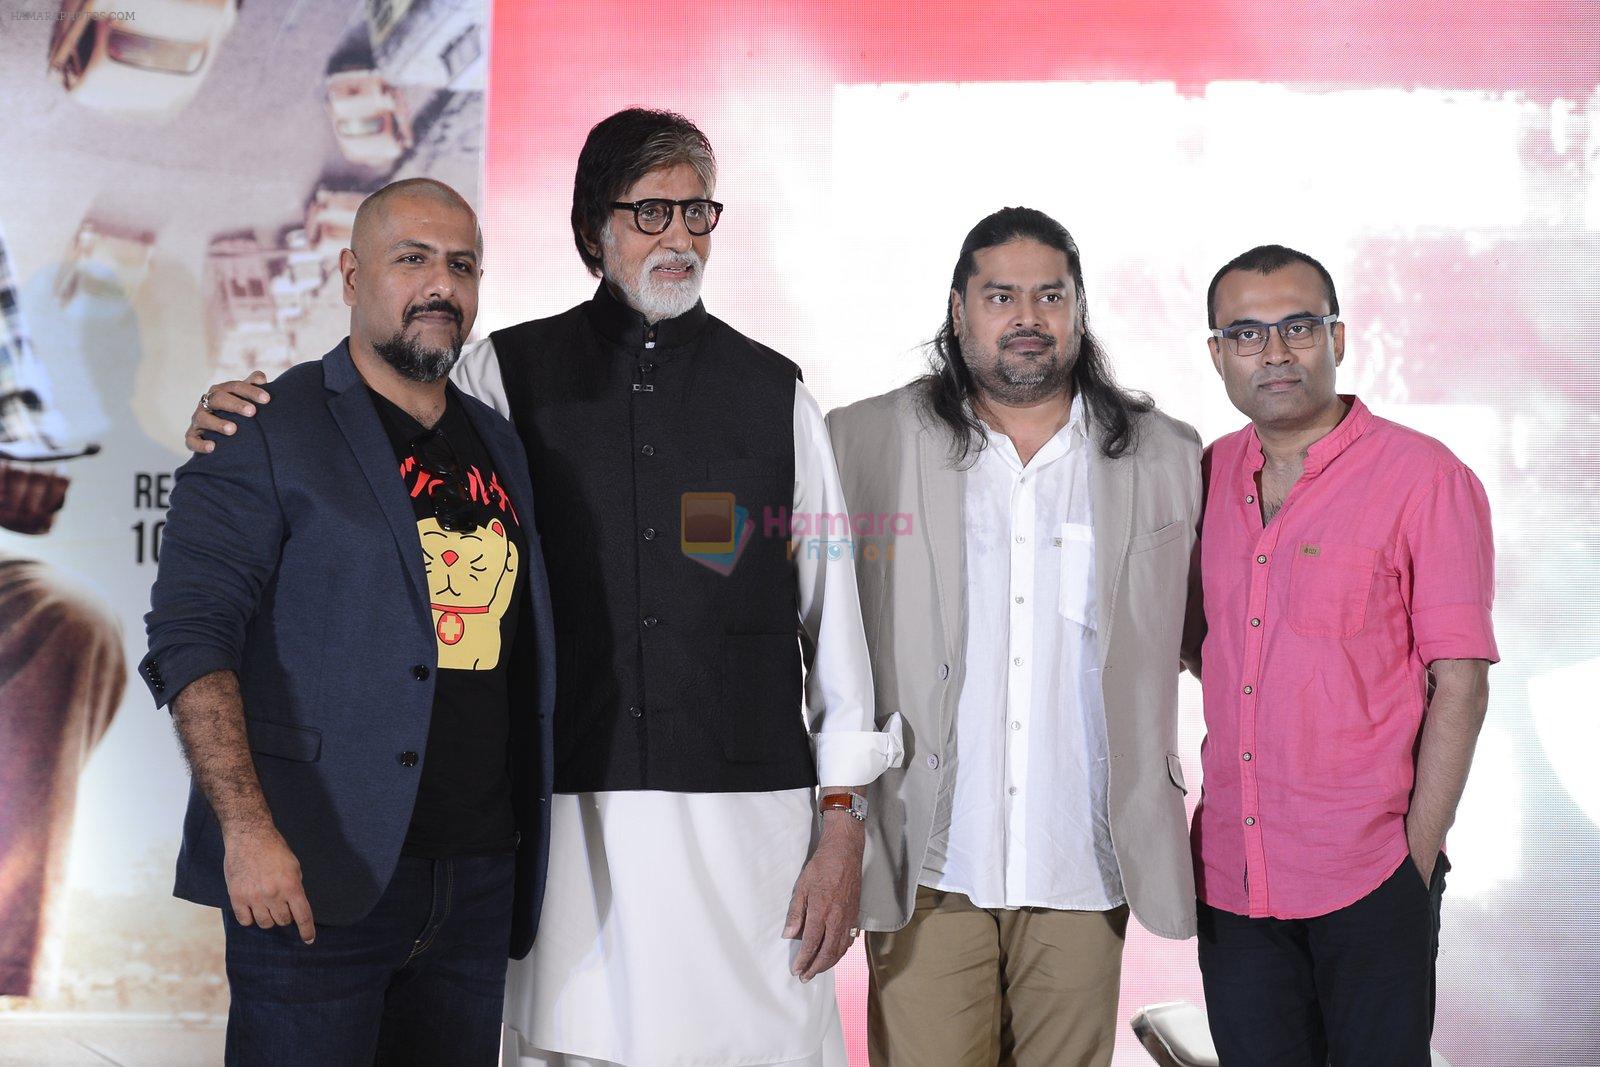 Amitabh Bachchan, Vishal Dadlani at New Song Released at the TE3N Music Launch in Mumbai on 27th May 2016